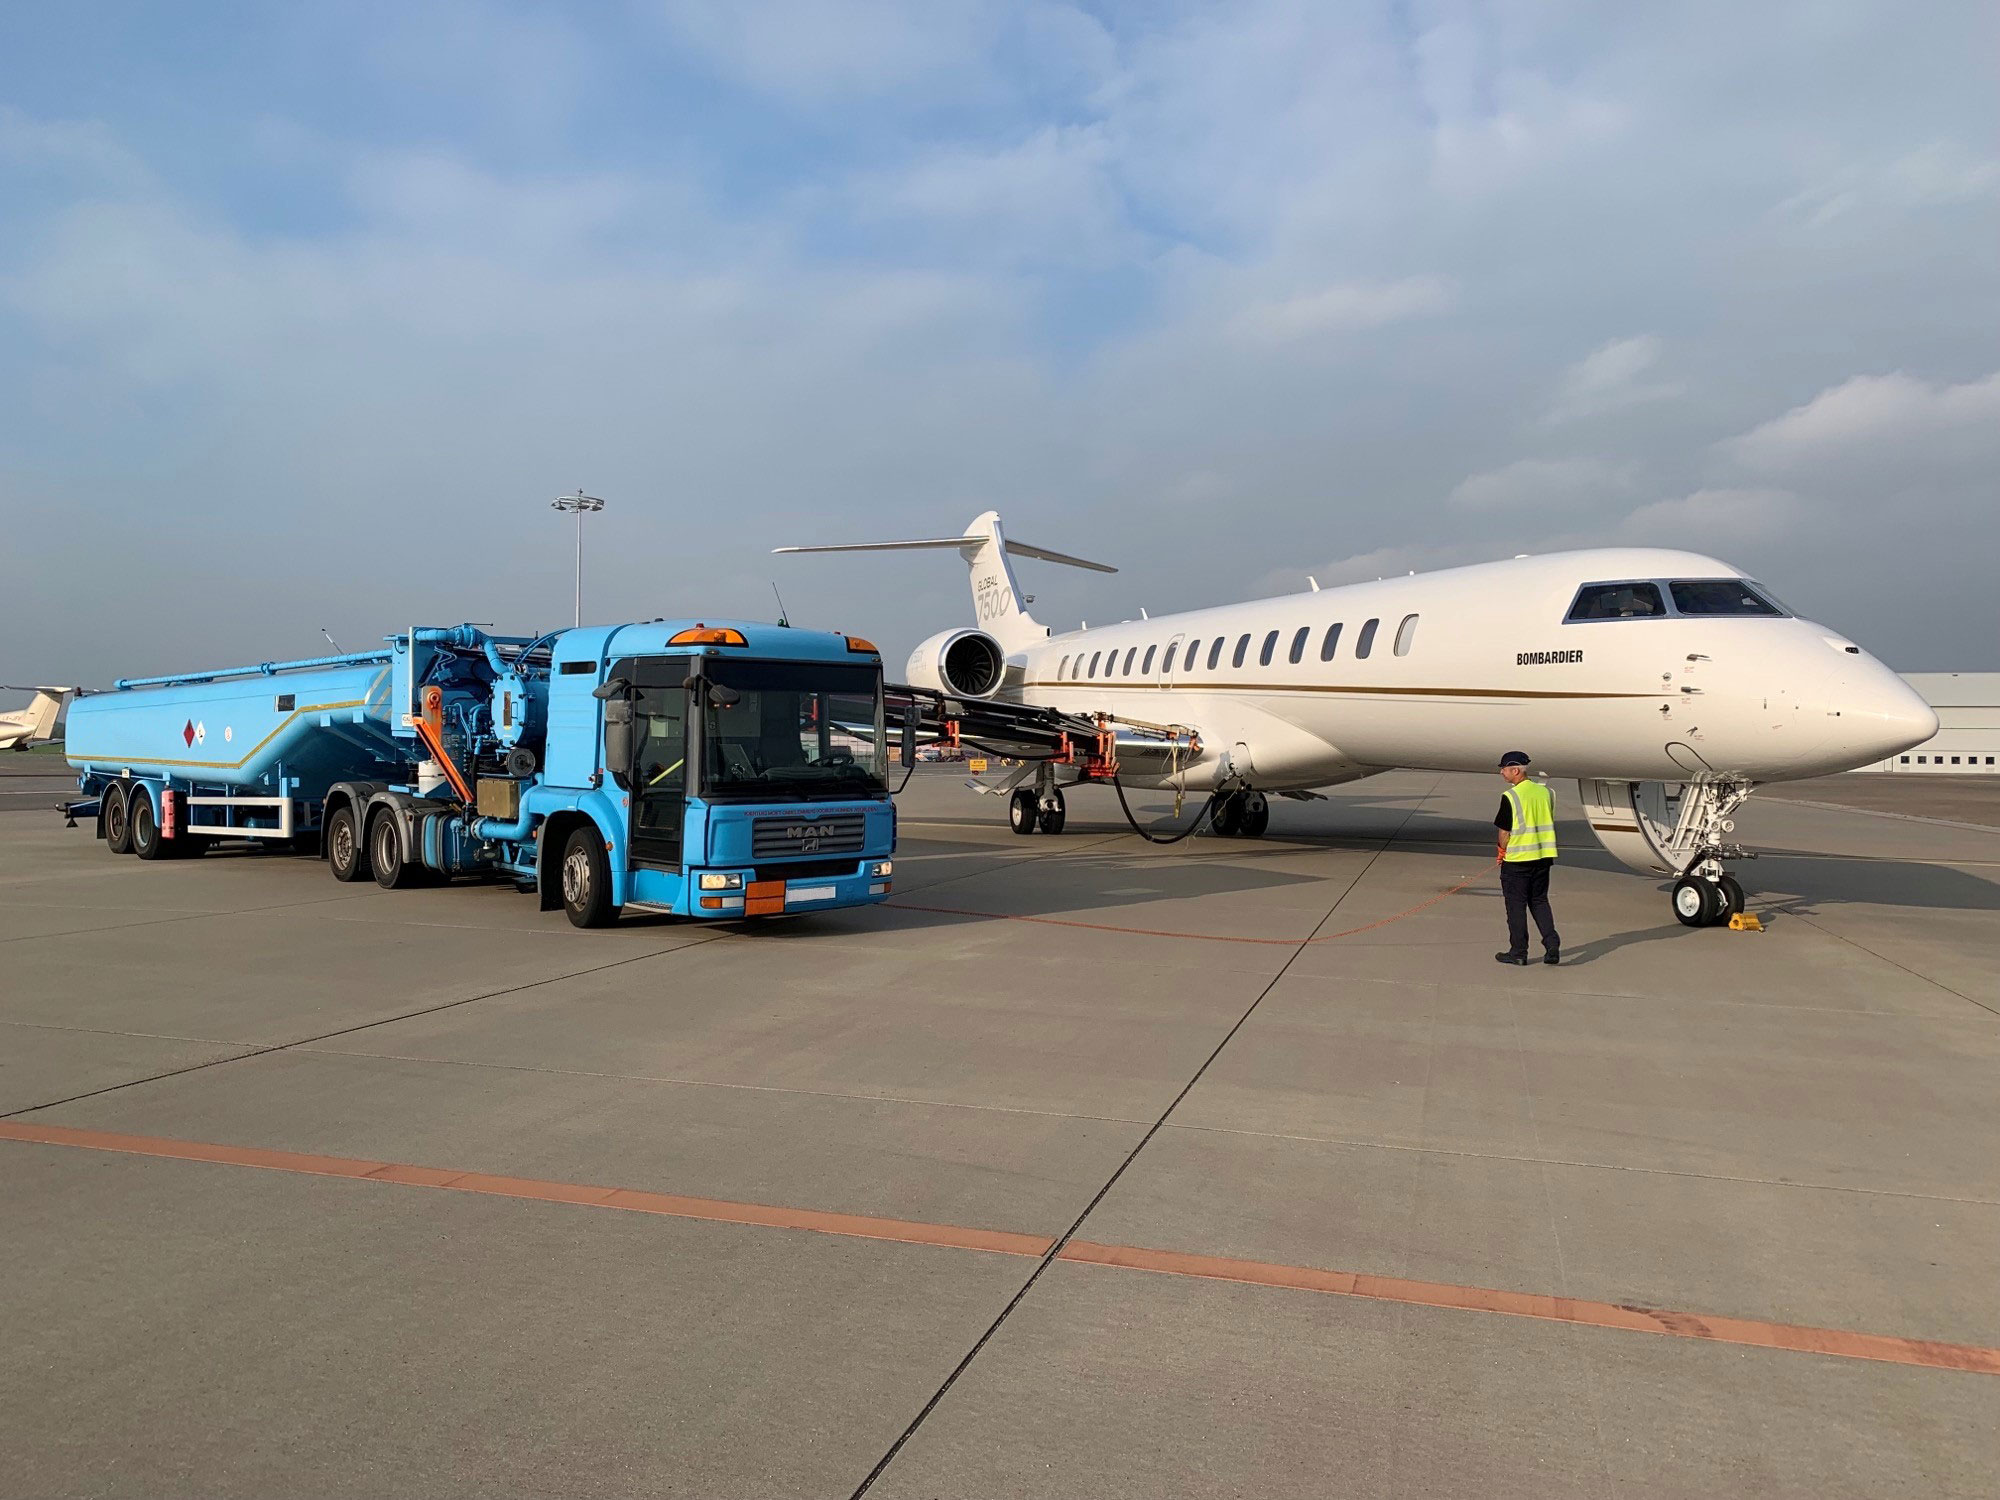 Global 7500 touring in Europe on Sustainable aviation fuel (SAF)